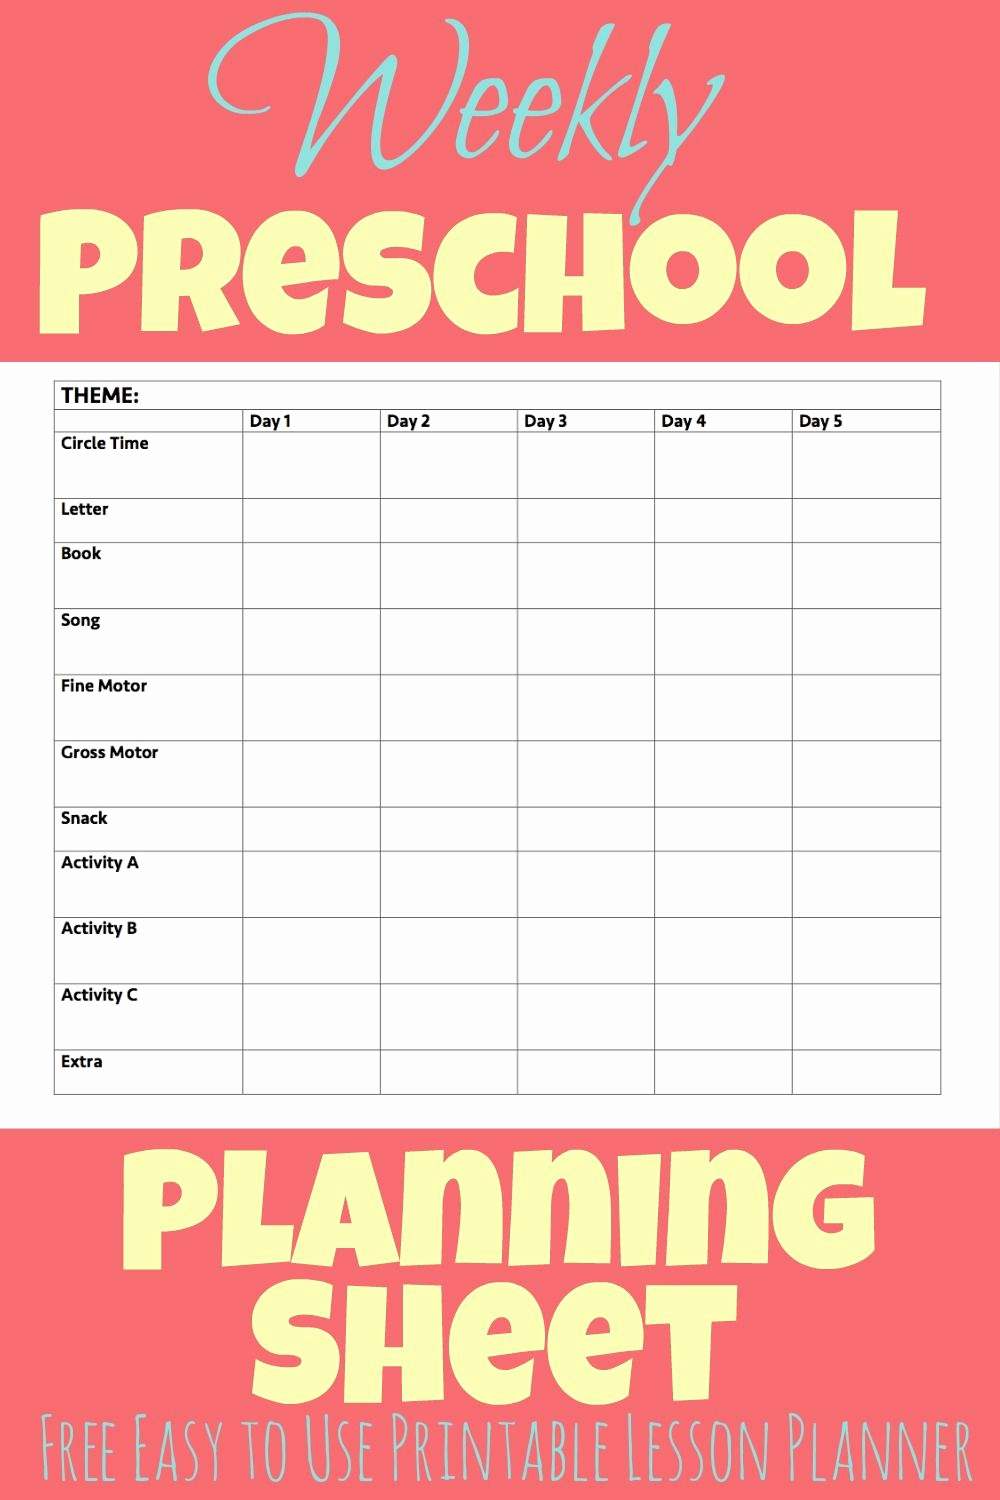 Weekly Lesson Plan for Preschool Unique This Free Printable Preschool Week Lesson Planner Makes